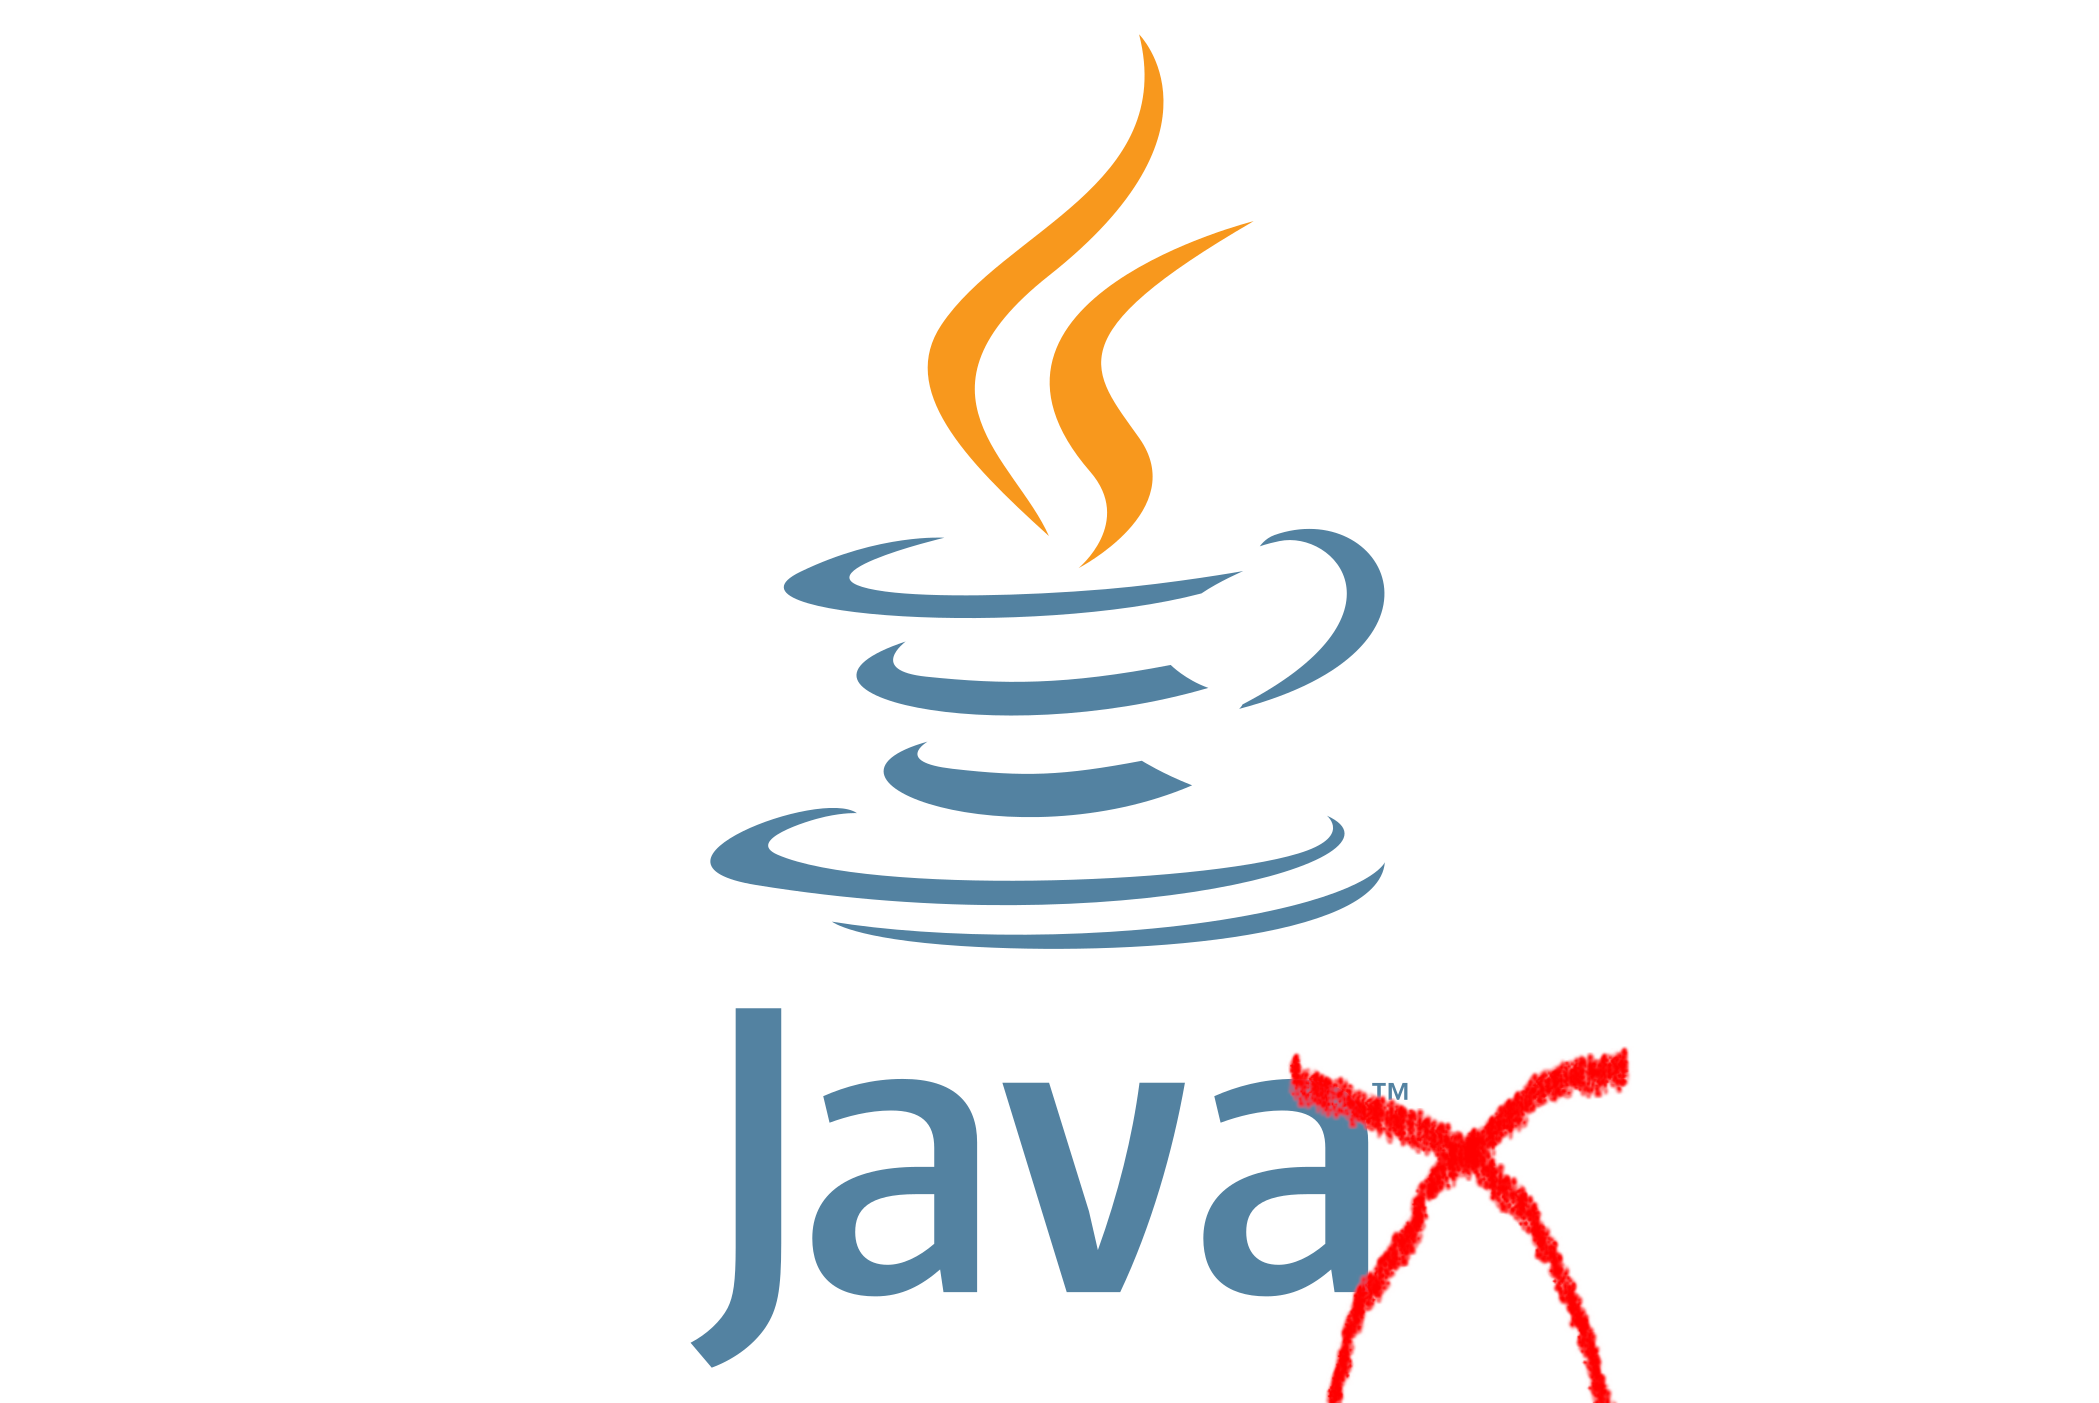 The Java programming language logo, with a red X painted on at the end, symbolizing both Javax and Java X-ing out javax